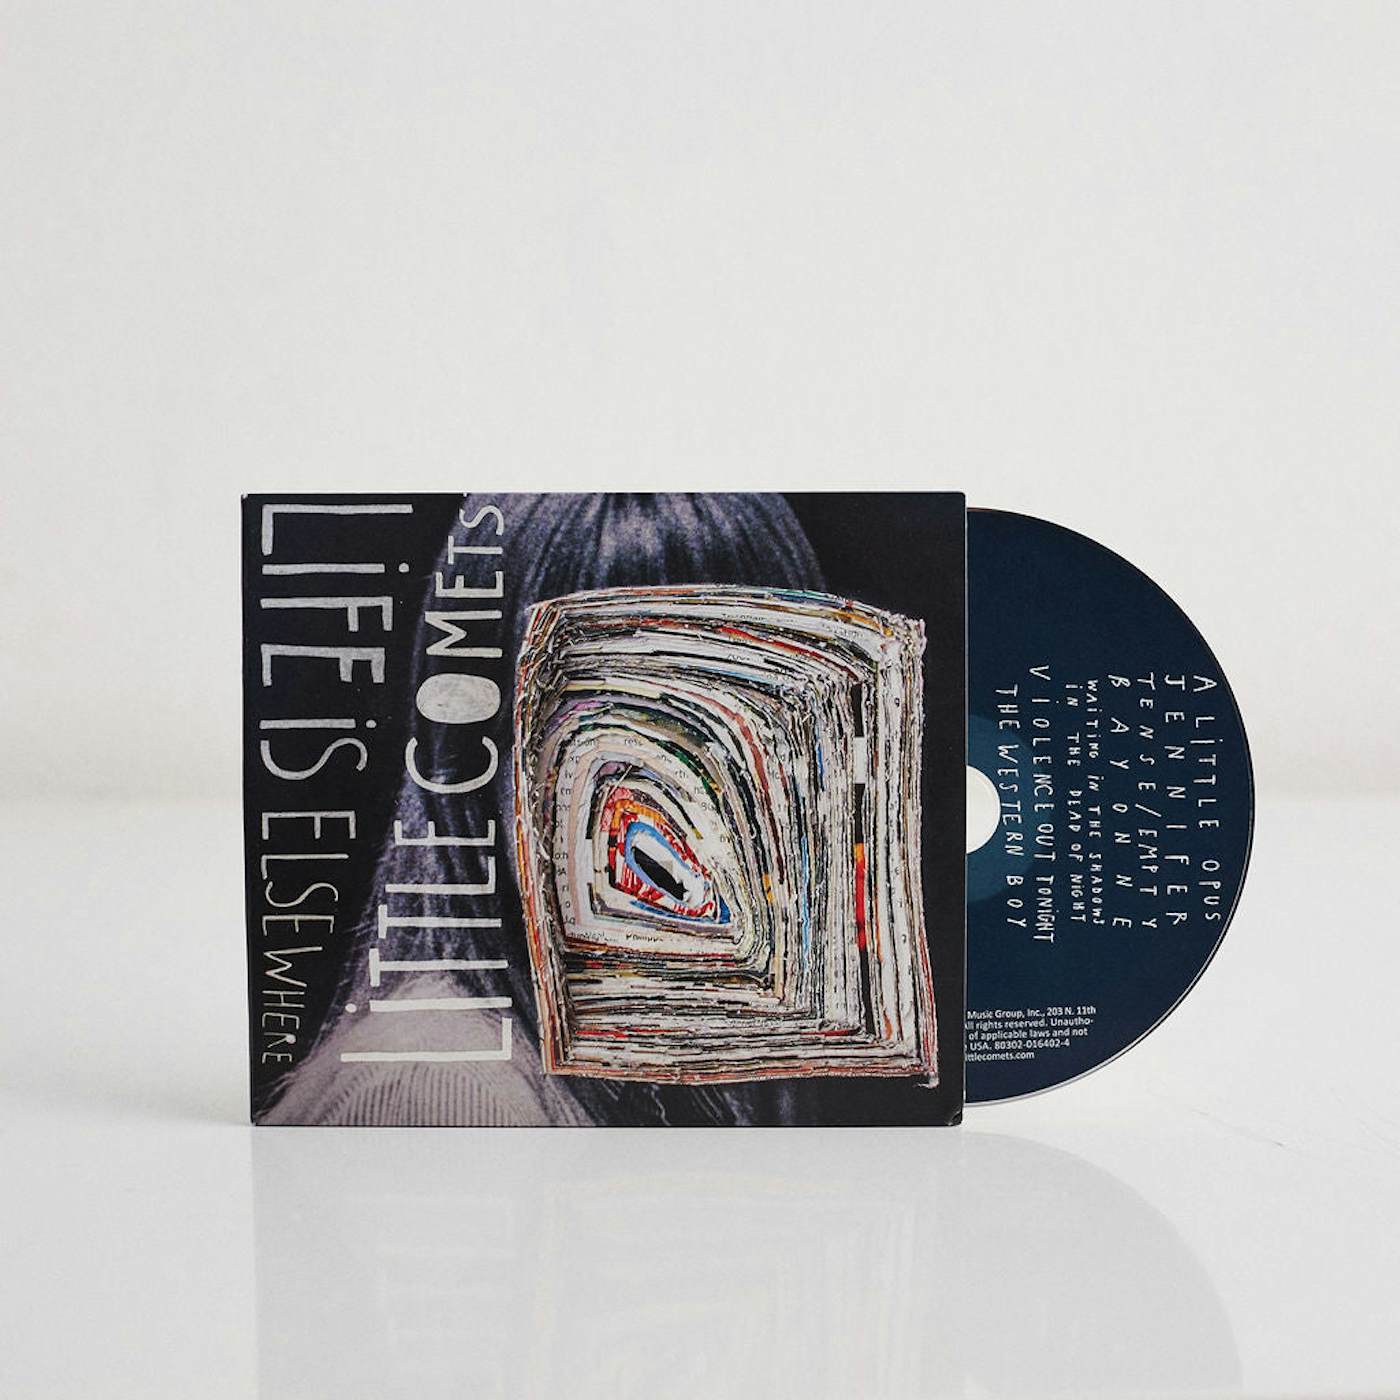 Little Comets Life Is Elsewhere (CD)